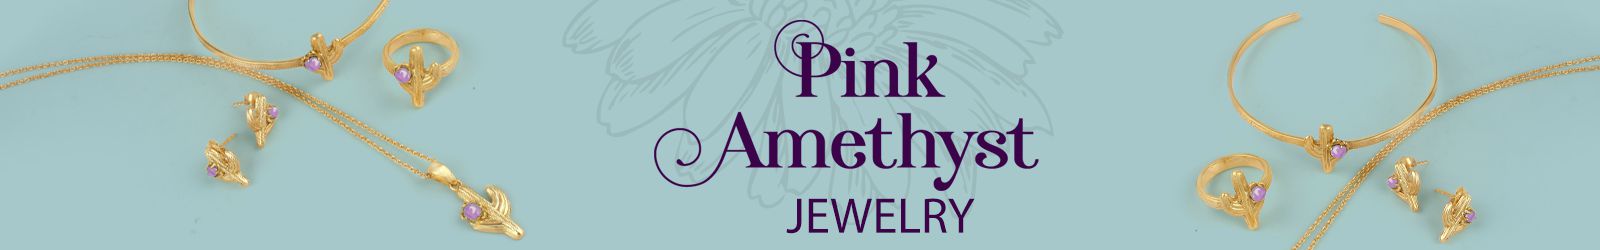 Silver Pink Amethyst Jewelry Wholesale Supplier